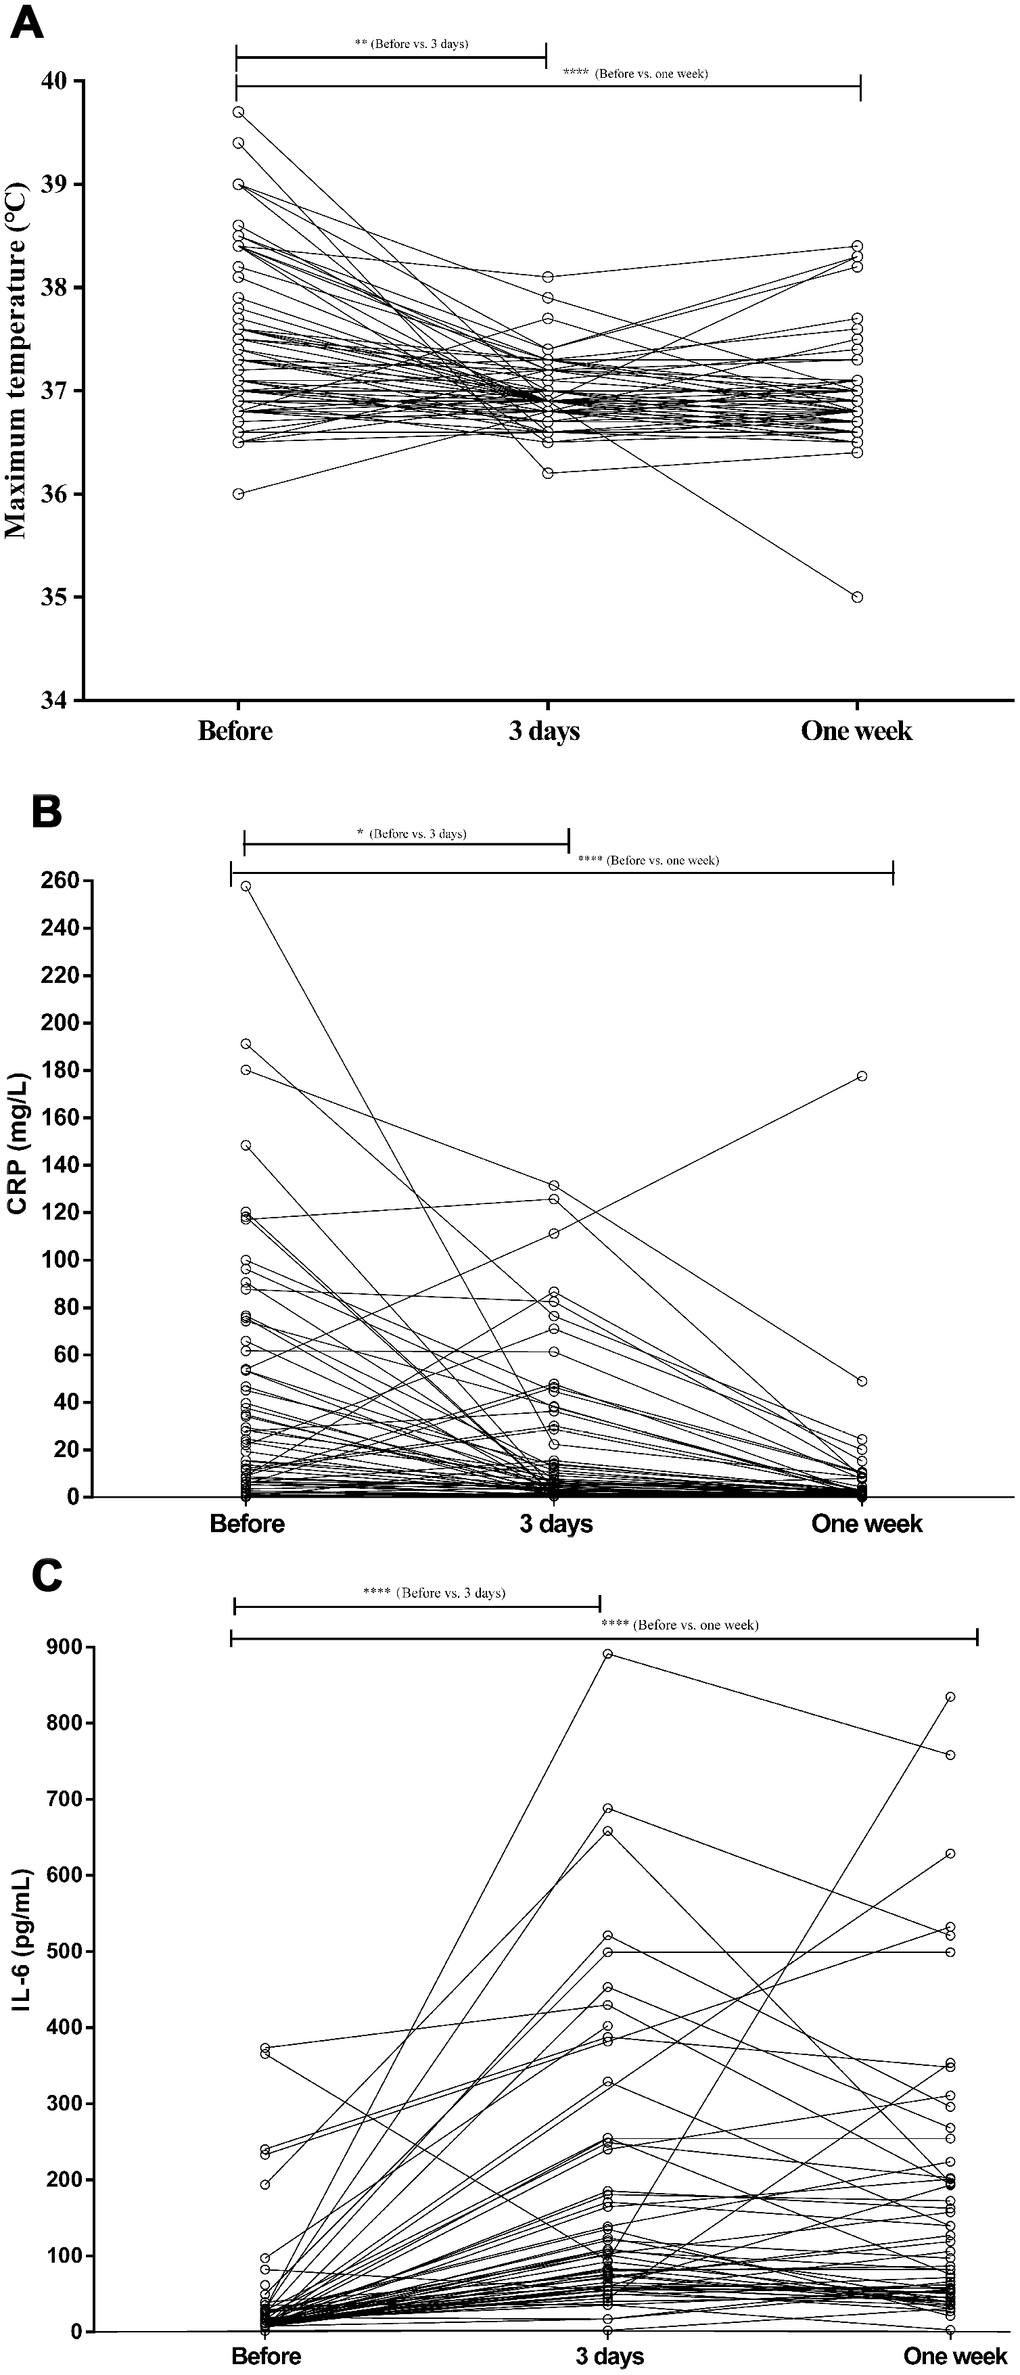 The values of maximum temperature, CRP, and IL-6 levels before and after tocilizumab treatment in COVID-19 patients. (A) The fever returned toward normal in most patients treated conventionally or with tocilizumab. (B) CRP levels decreased significantly after tocilizumab treatment and returned to normal in most conventionally treated patients. (C) IL-6 increased significantly after tocilizumab treatment in most patients.